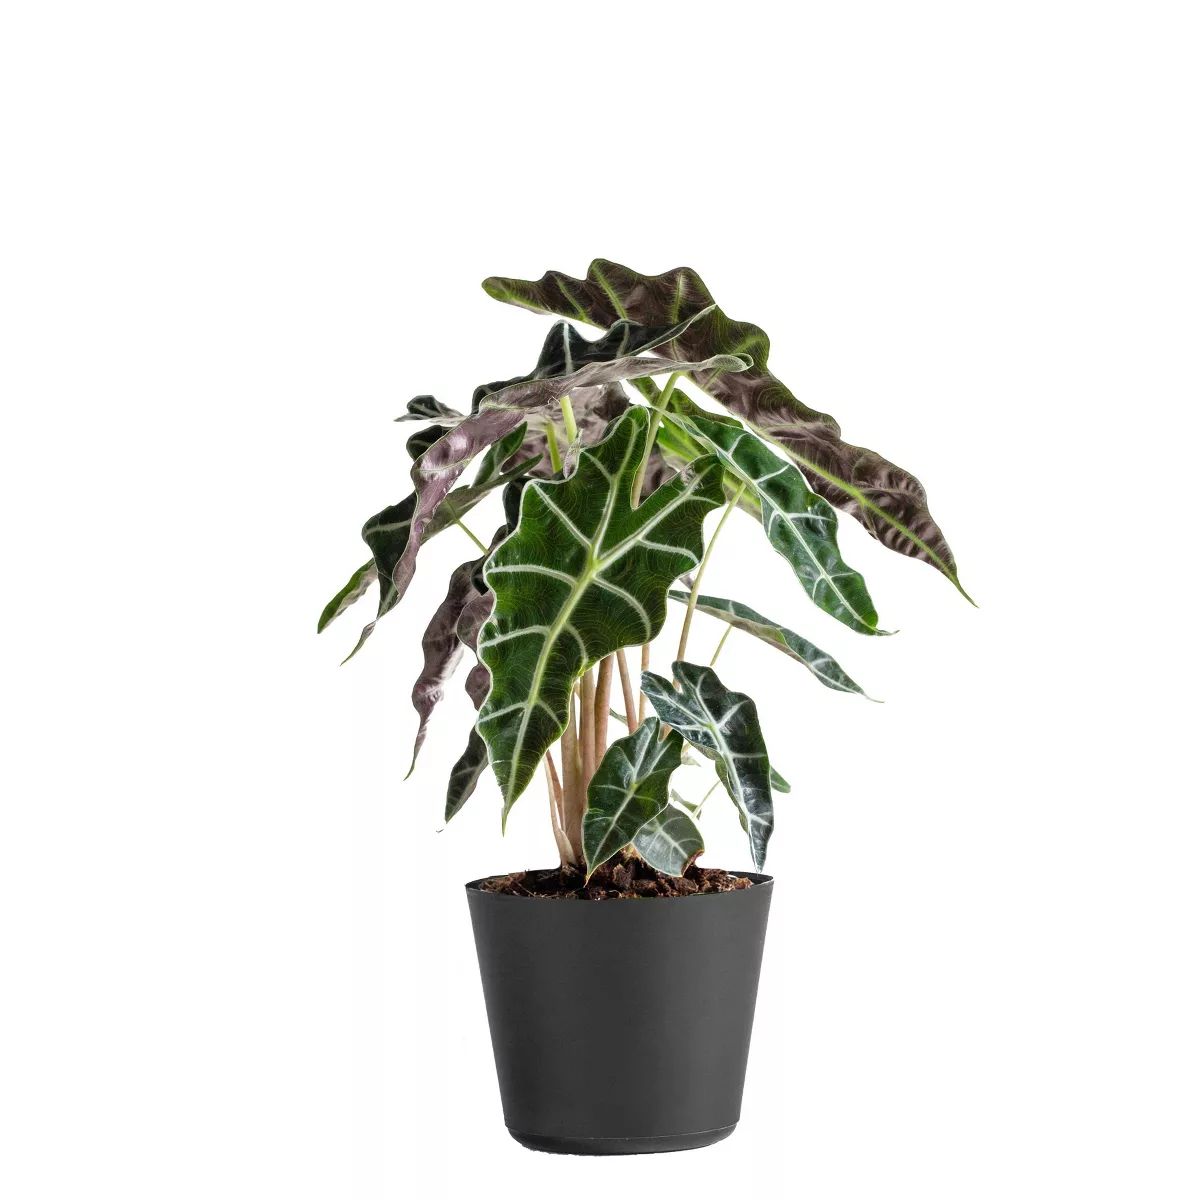 Live Alocasia Polly Elephant Ear Plant in 6" Standard Black Planter | Target